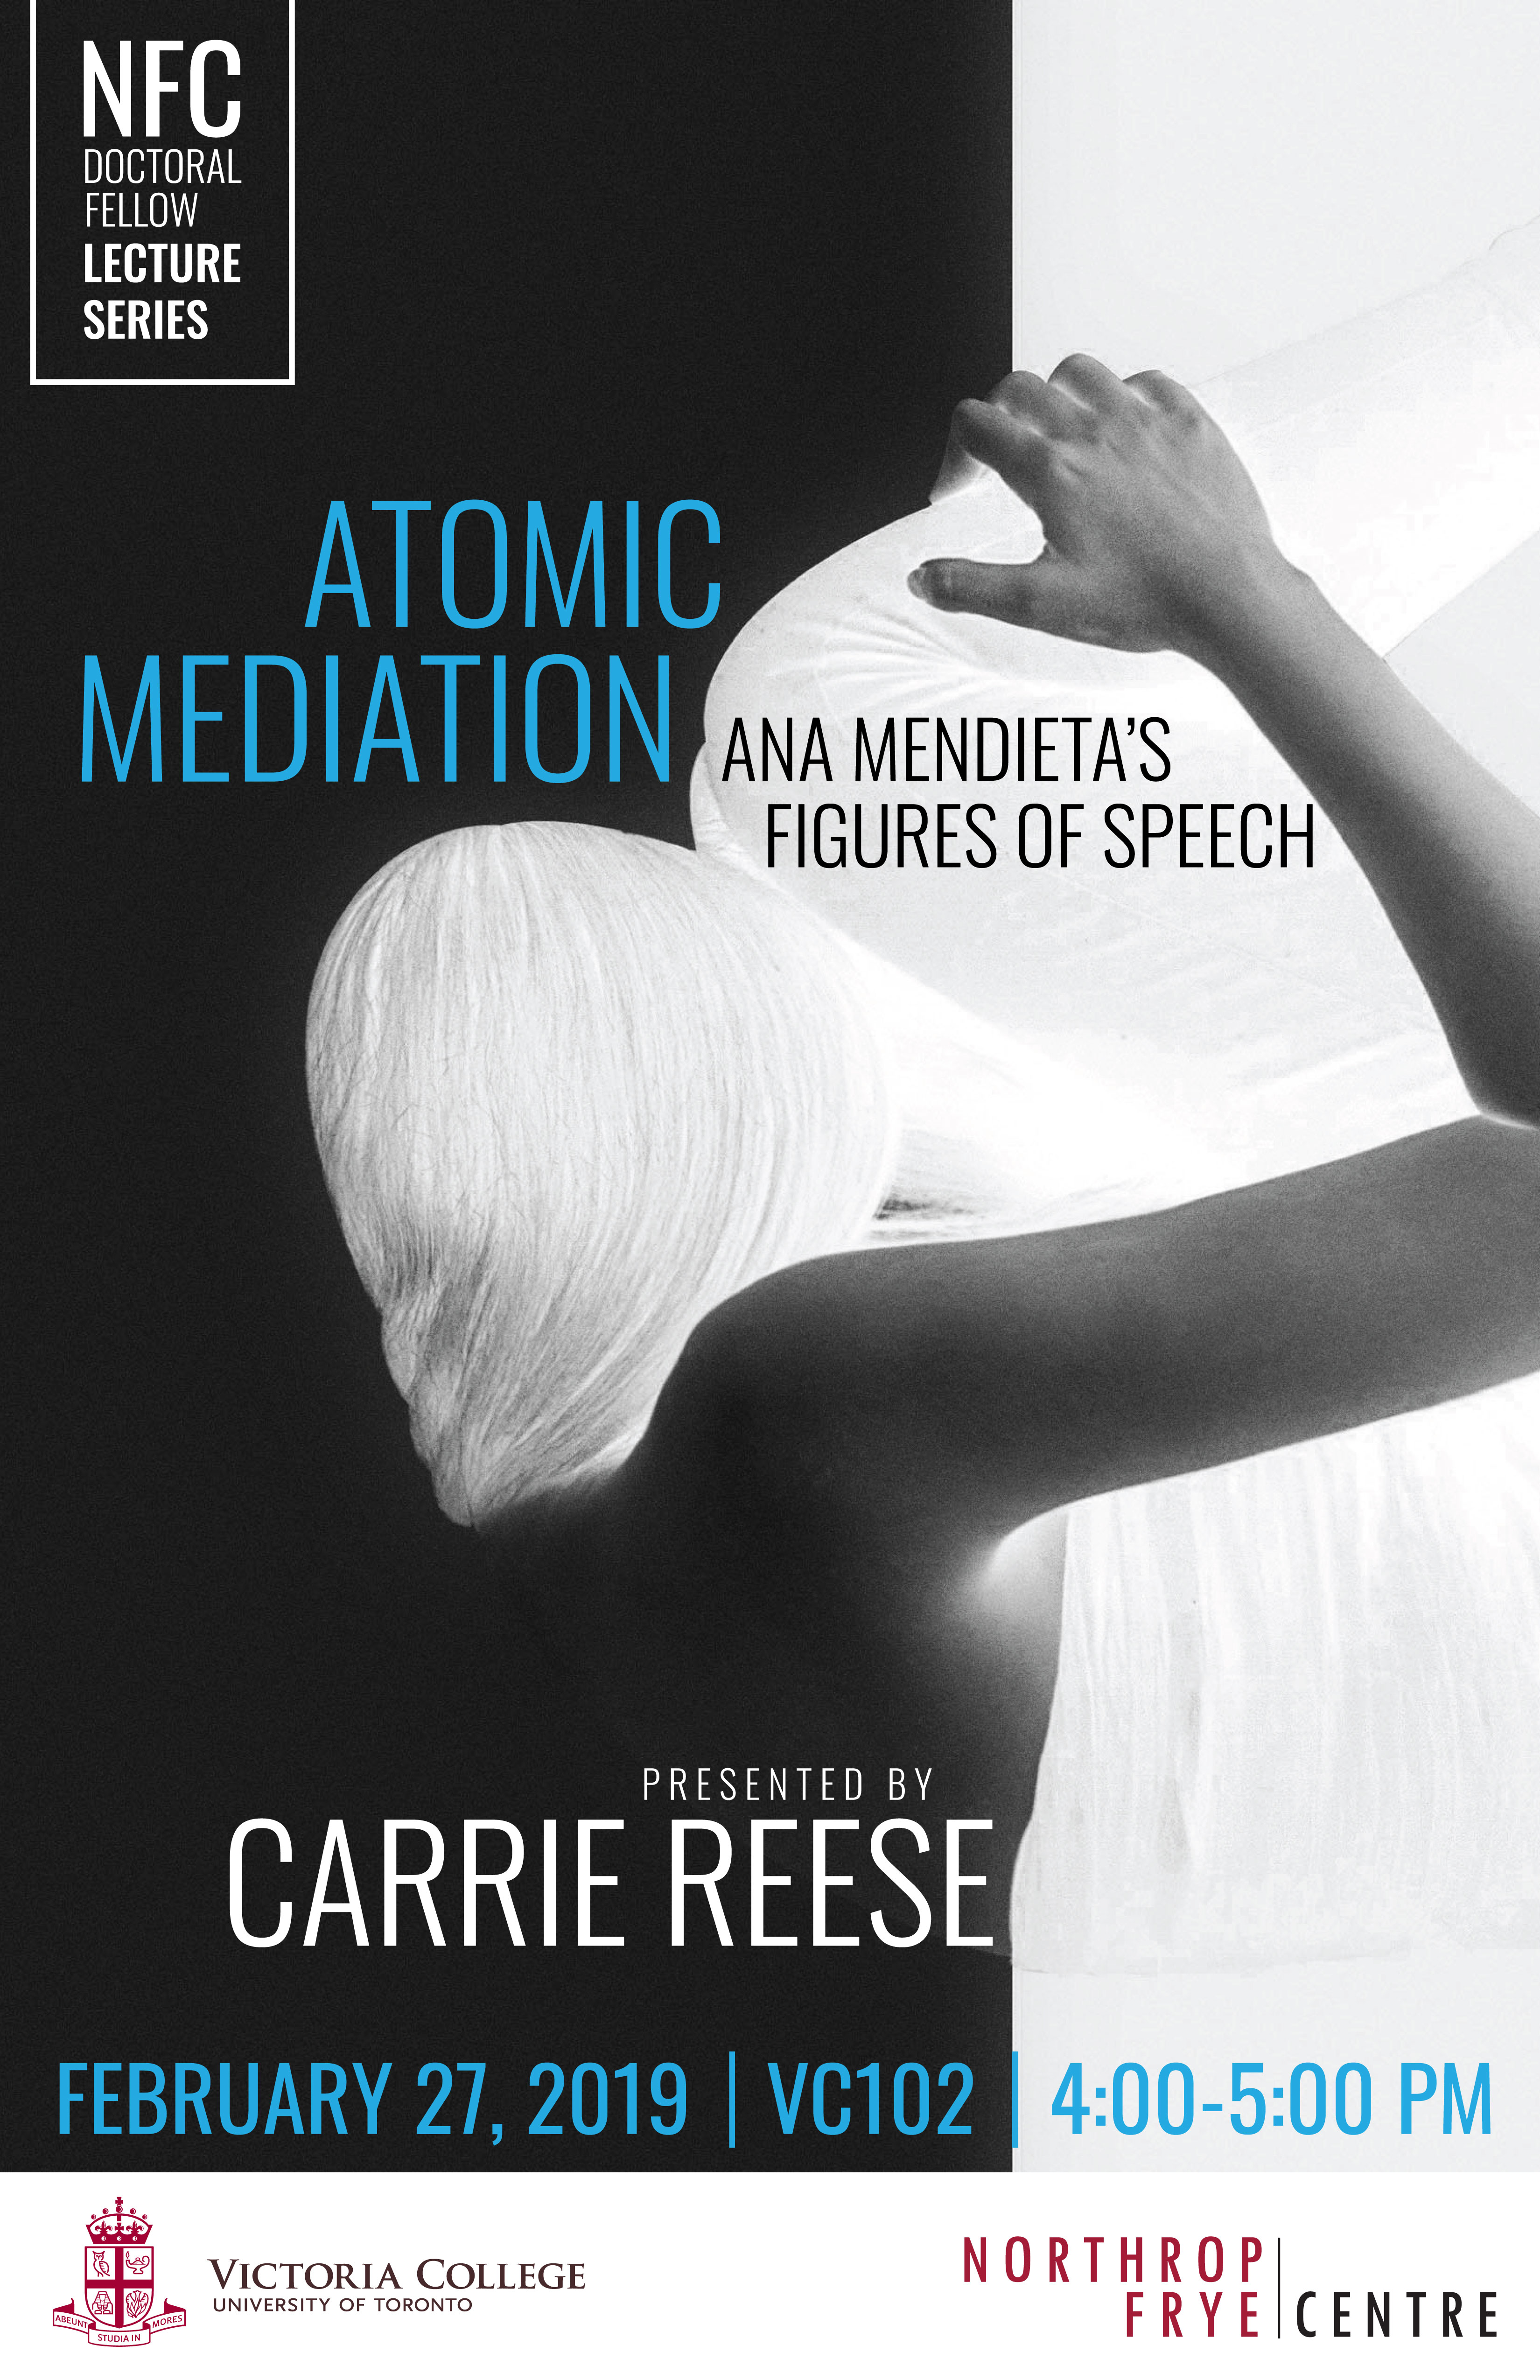 Feb. 27, 2019 | Atomic Mediation | Carrie Reese